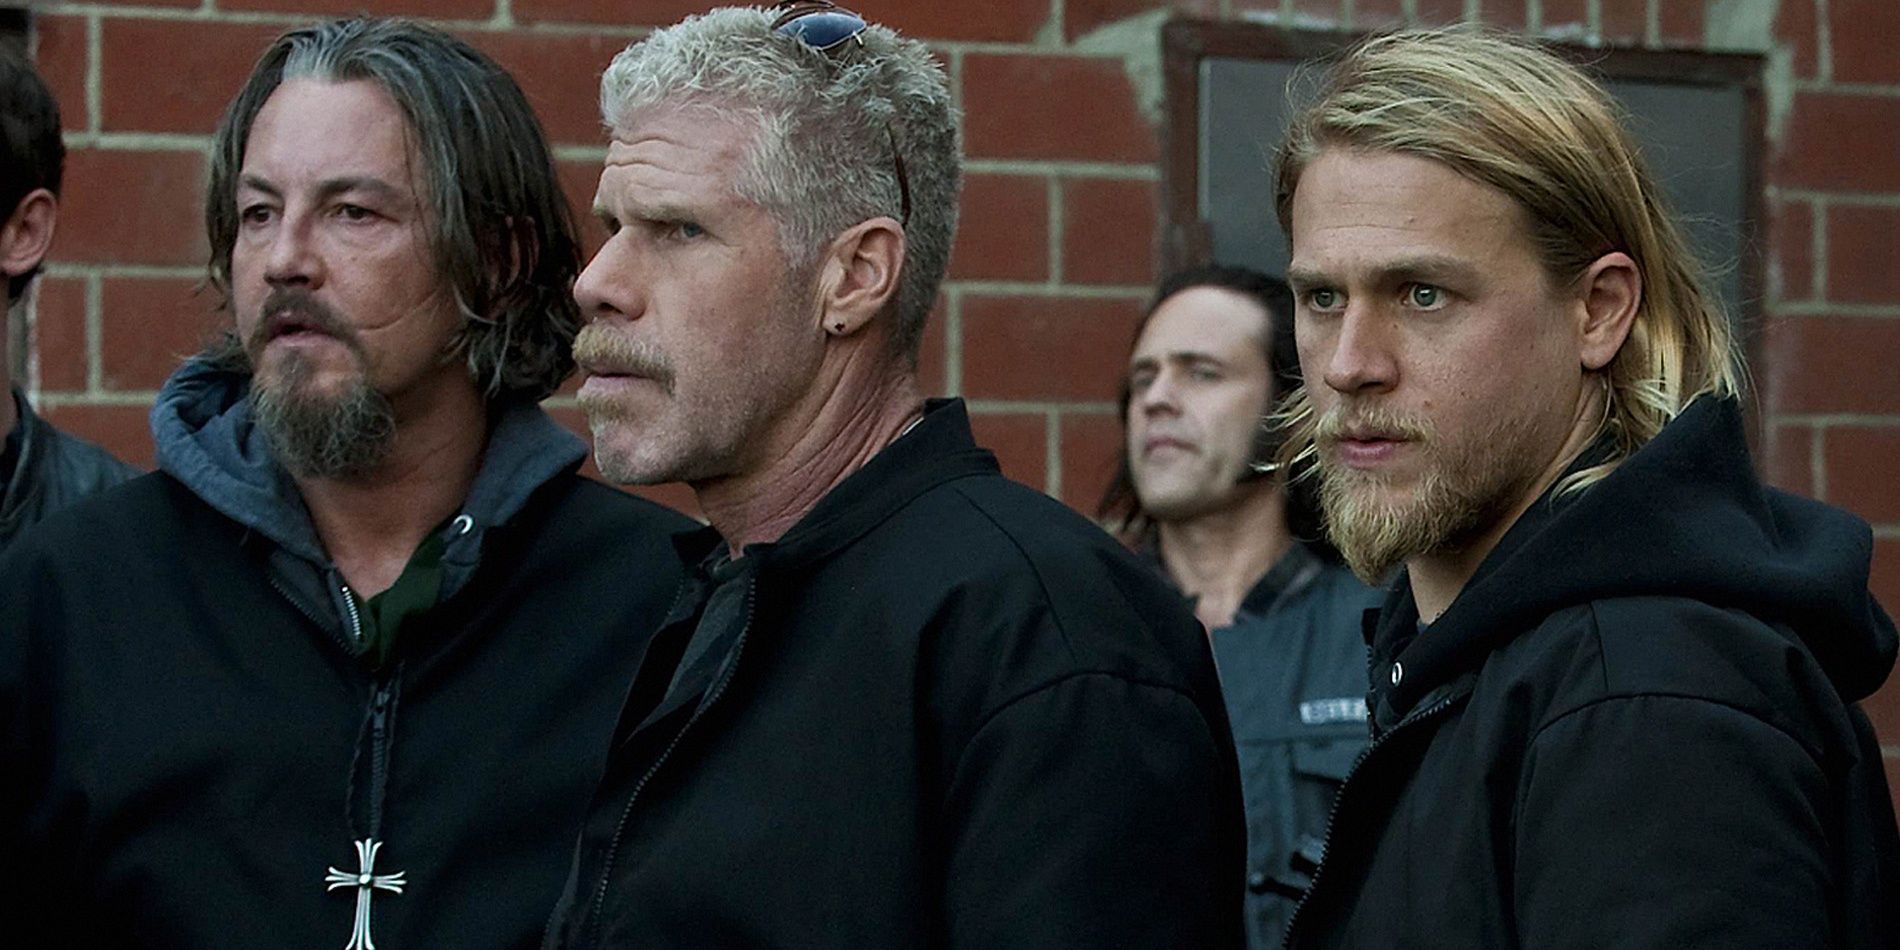 The highest-rated season premiere of Sons Of Anarchy comes from the third s...